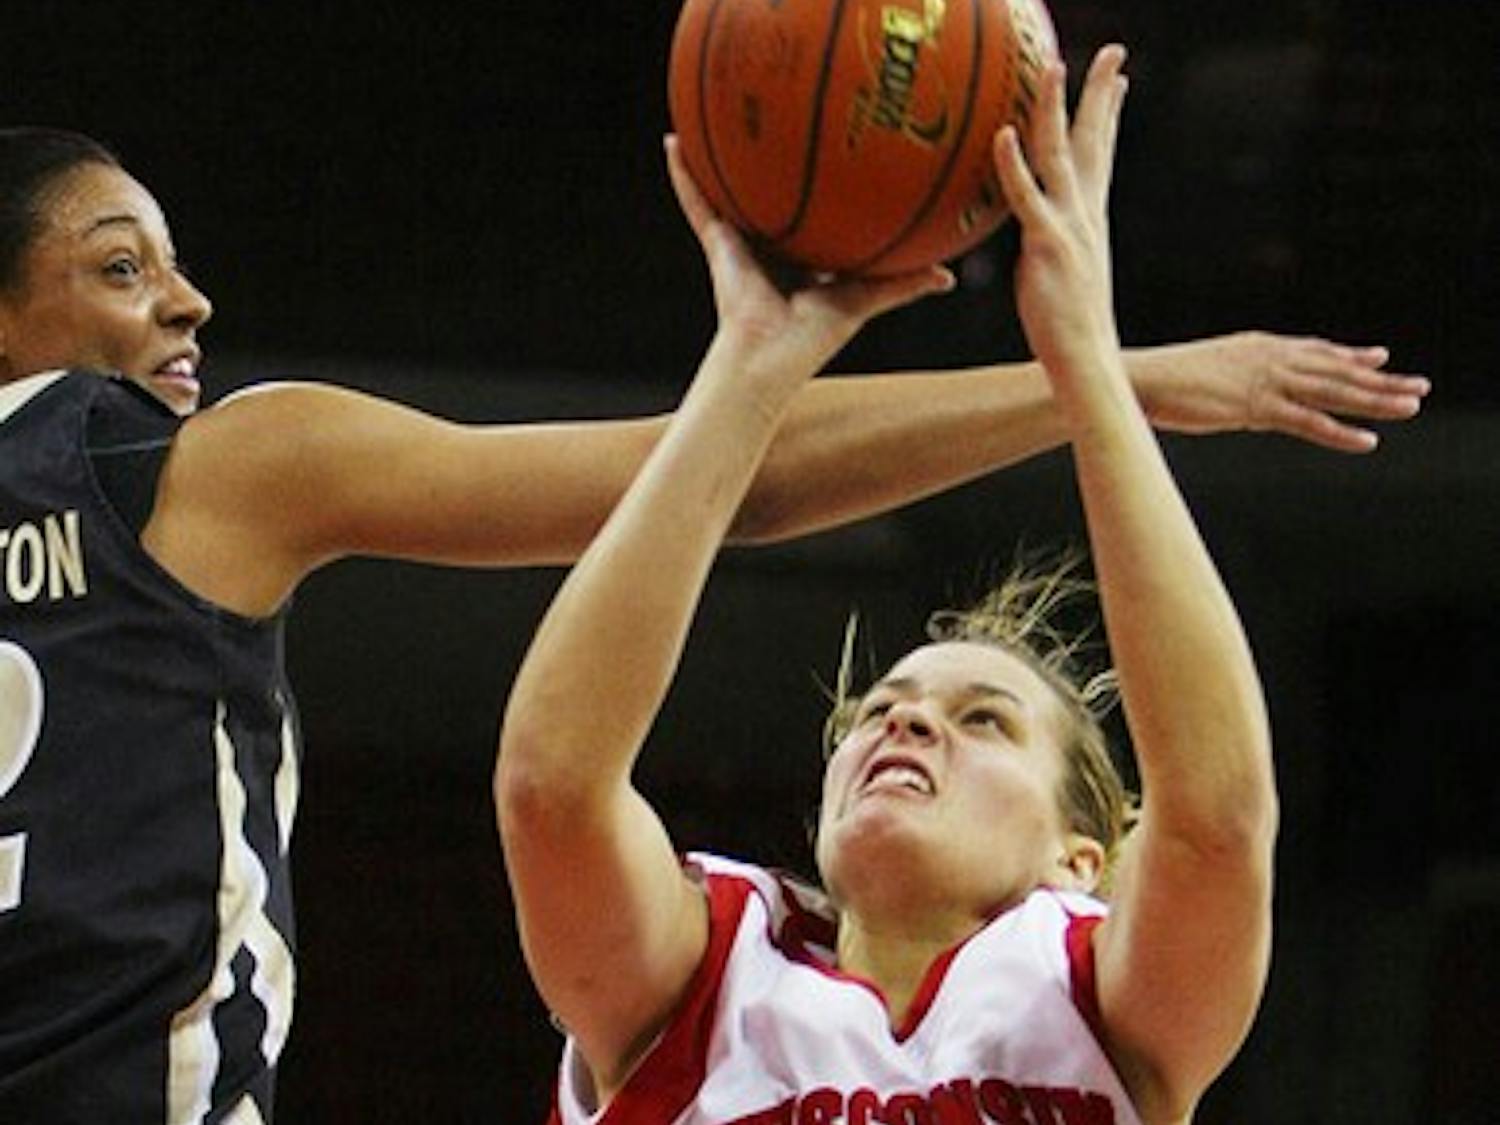 Badgers regroup, prepare for Purdue without Dunham